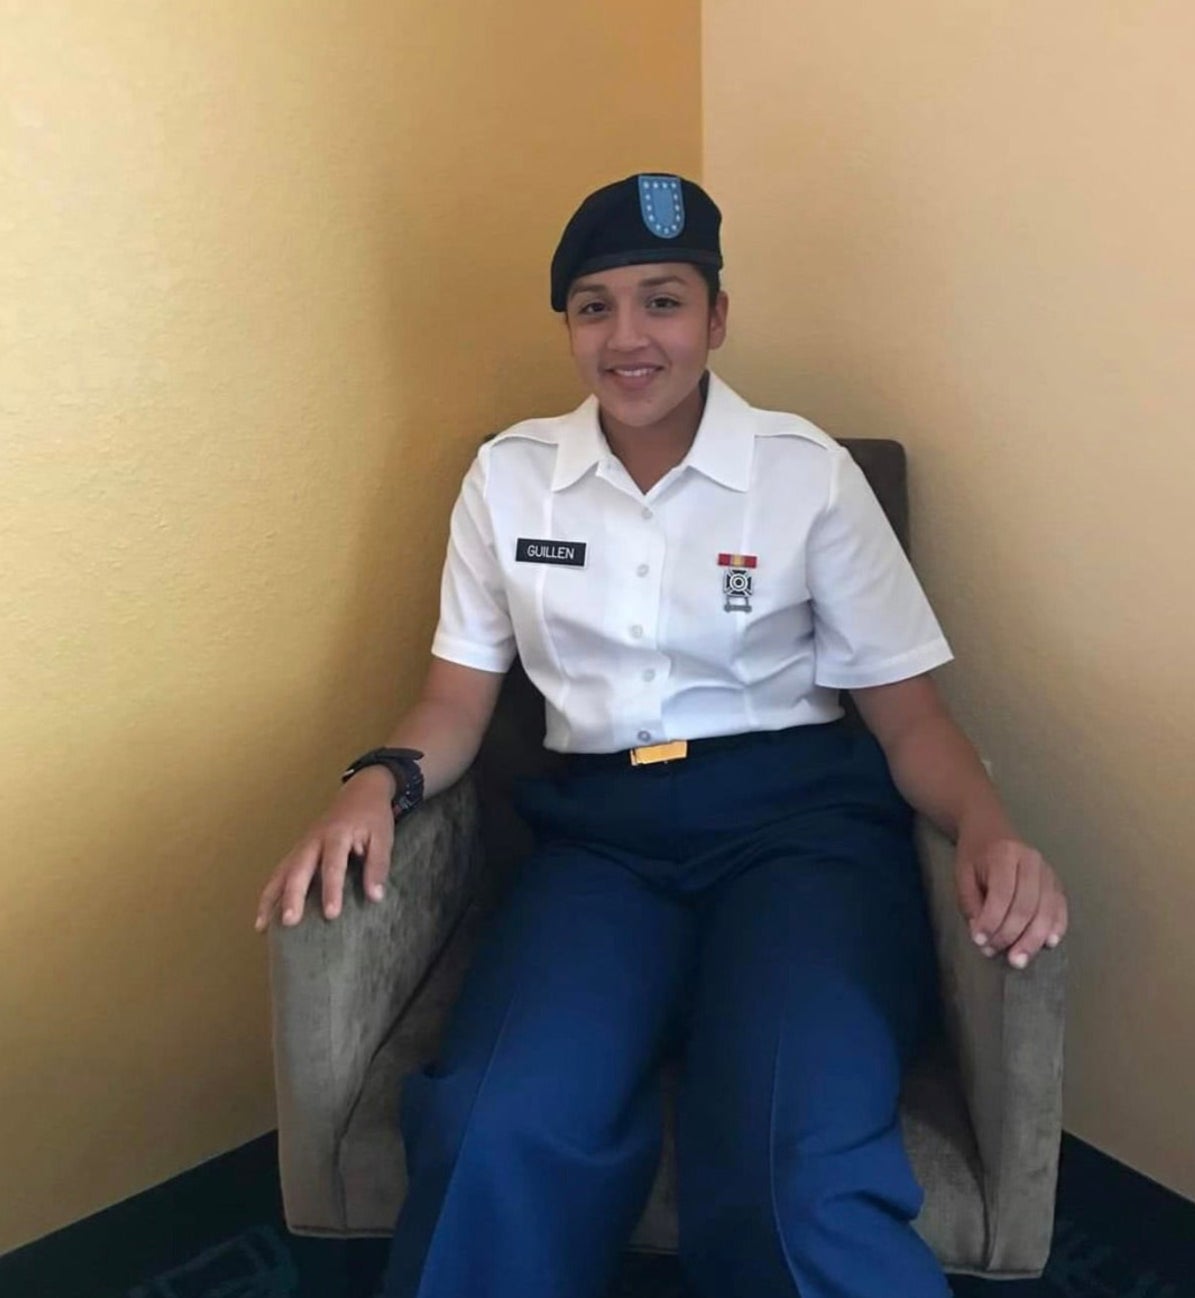 Vanessa Guillen joined the Army right after high school and was ‘inspired’ by other serving family members, her sister says